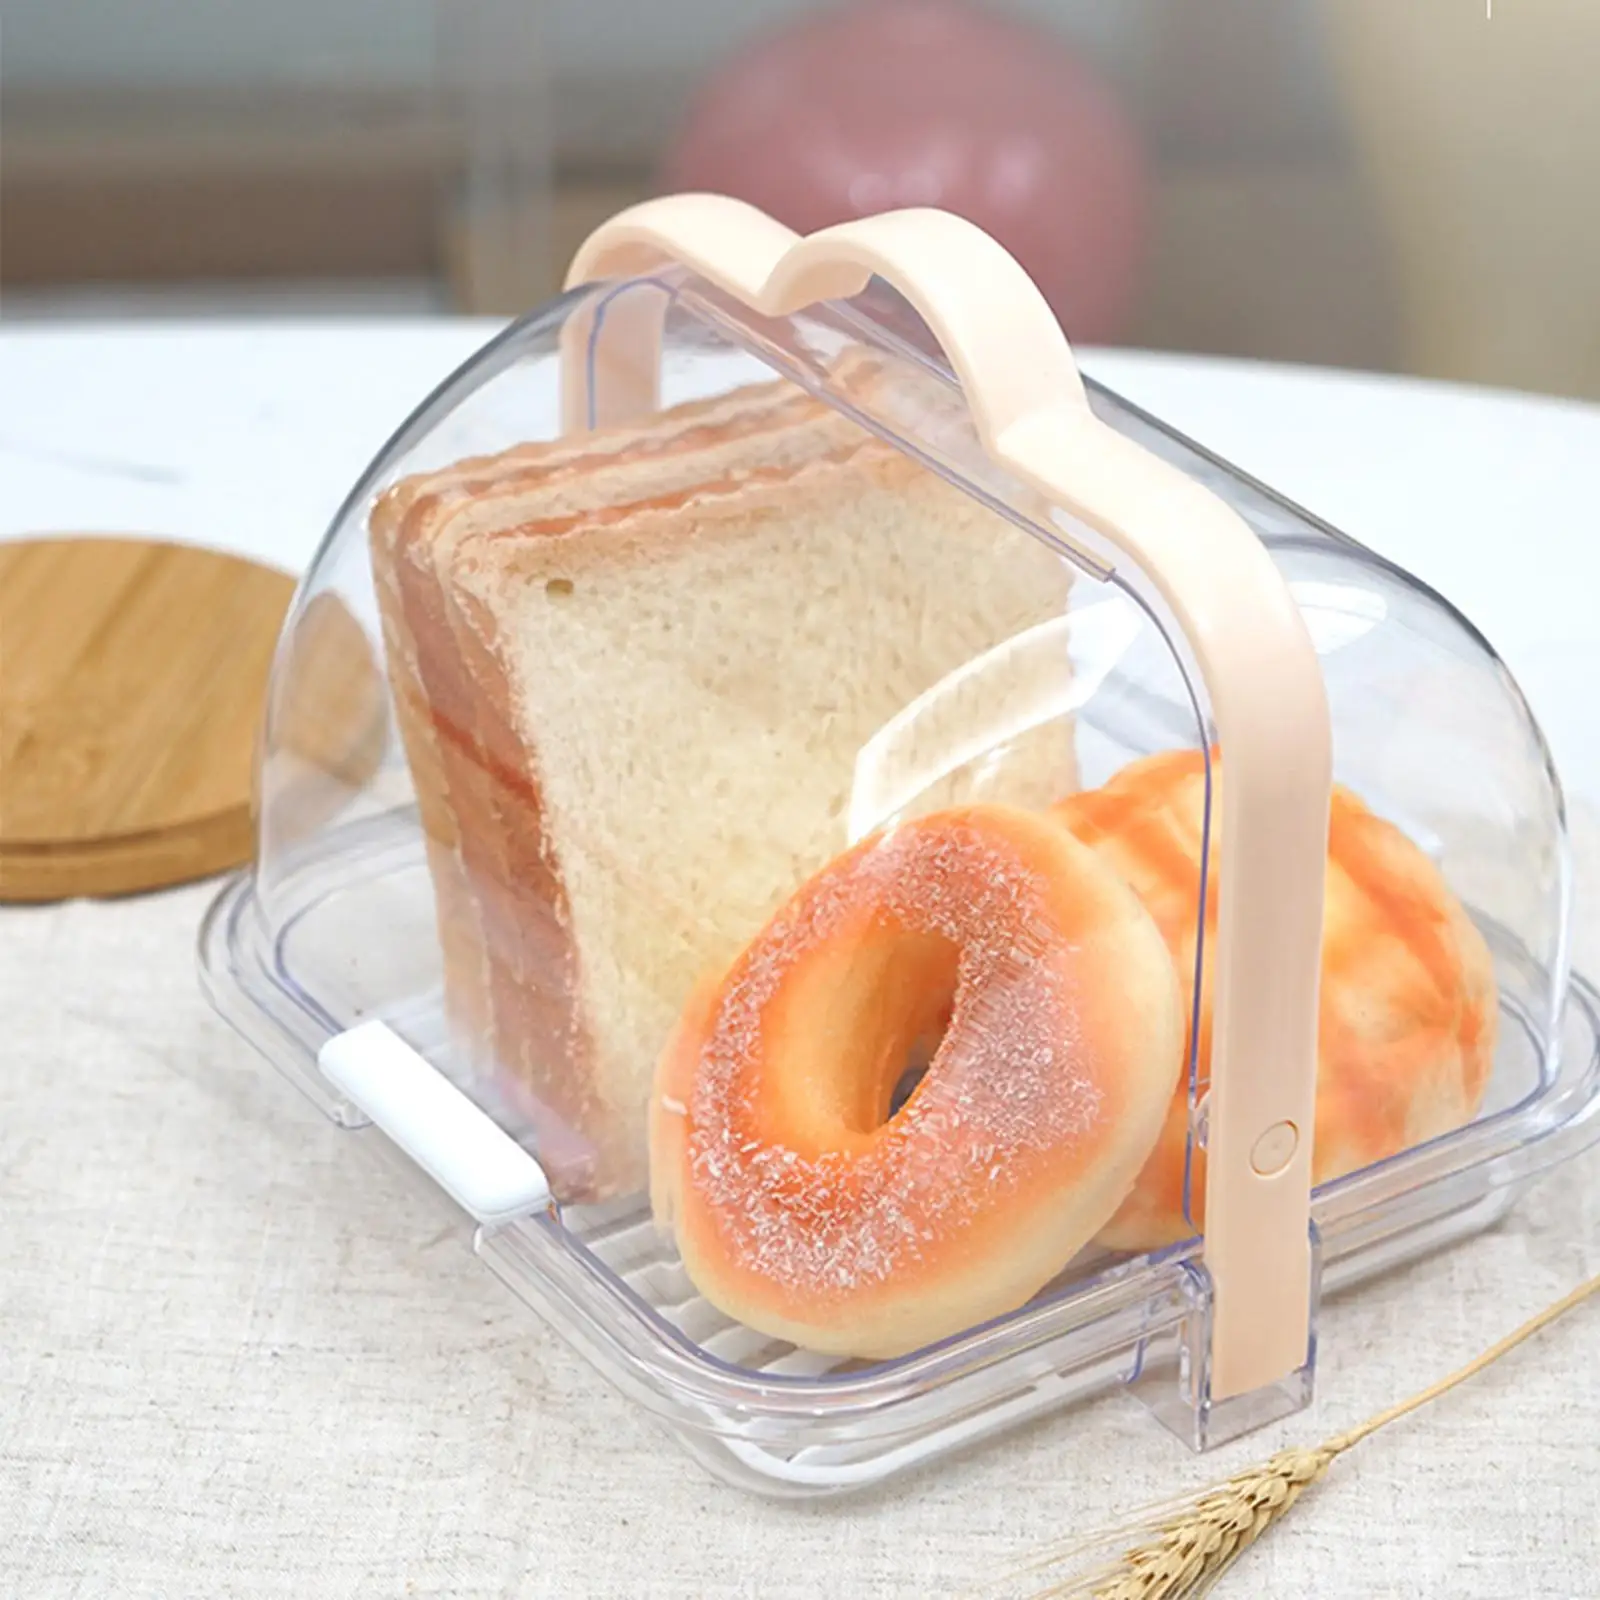 Cake Holder Tart Cookie Dustproof L8.39``xw8.39``xh7.09`` Cake Storage Container for Fruits Picnic Party Kitchen Vegetables